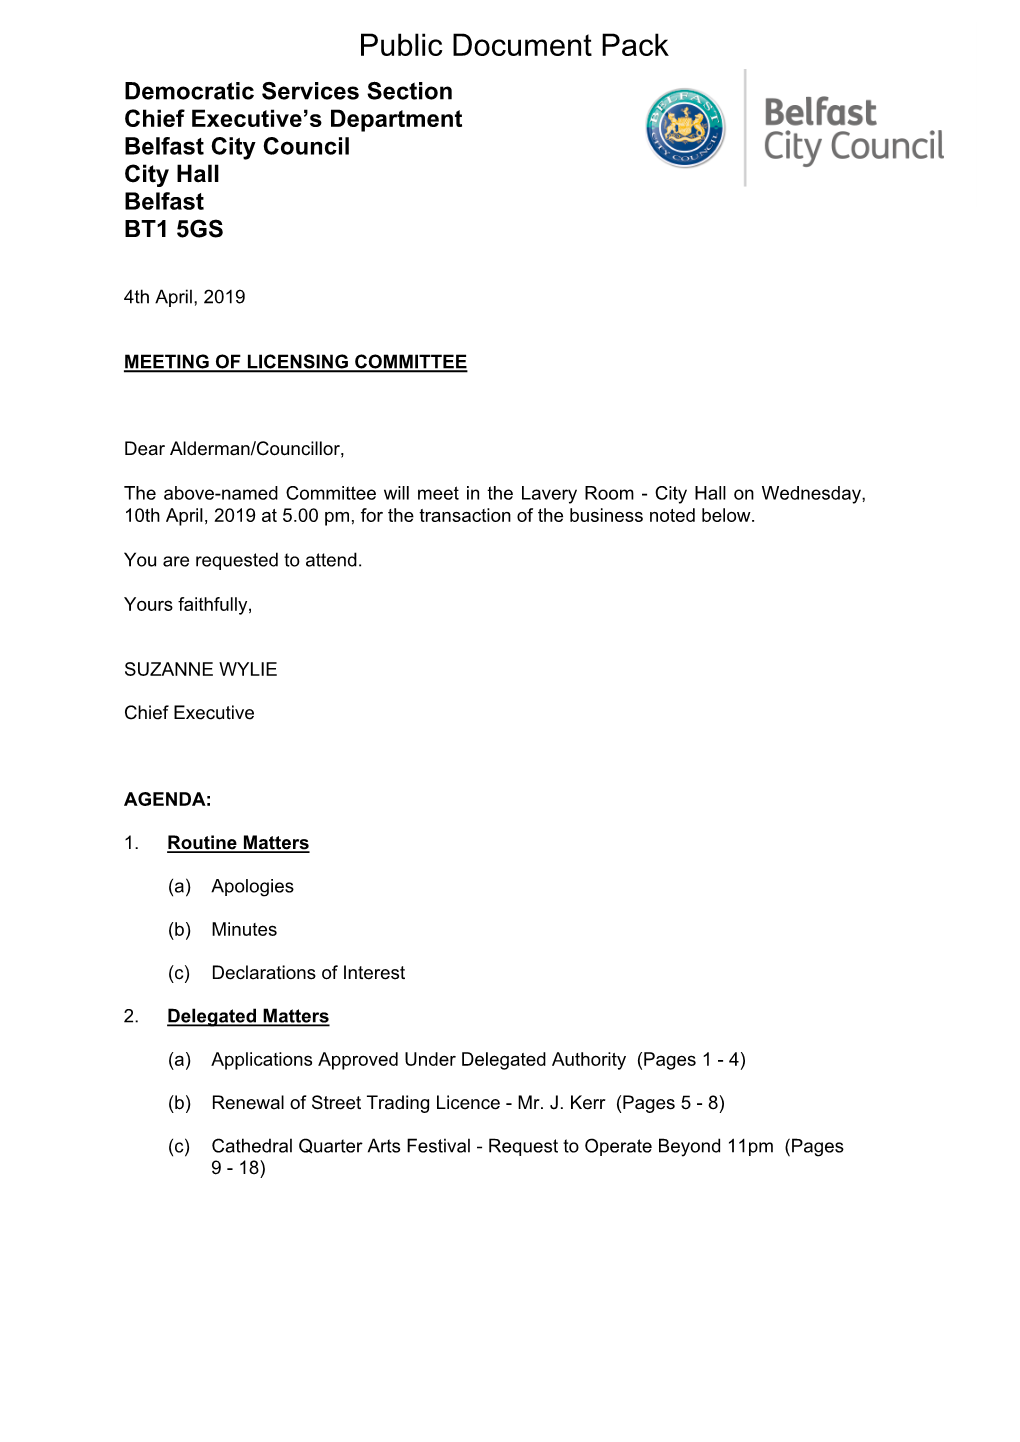 (Public Pack)Agenda Document for Licensing Committee, 10/04/2019